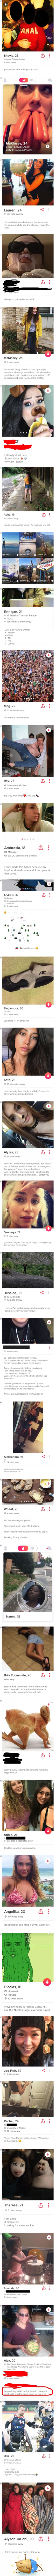 15+ Photos That Show Tinder Users Have No Shame